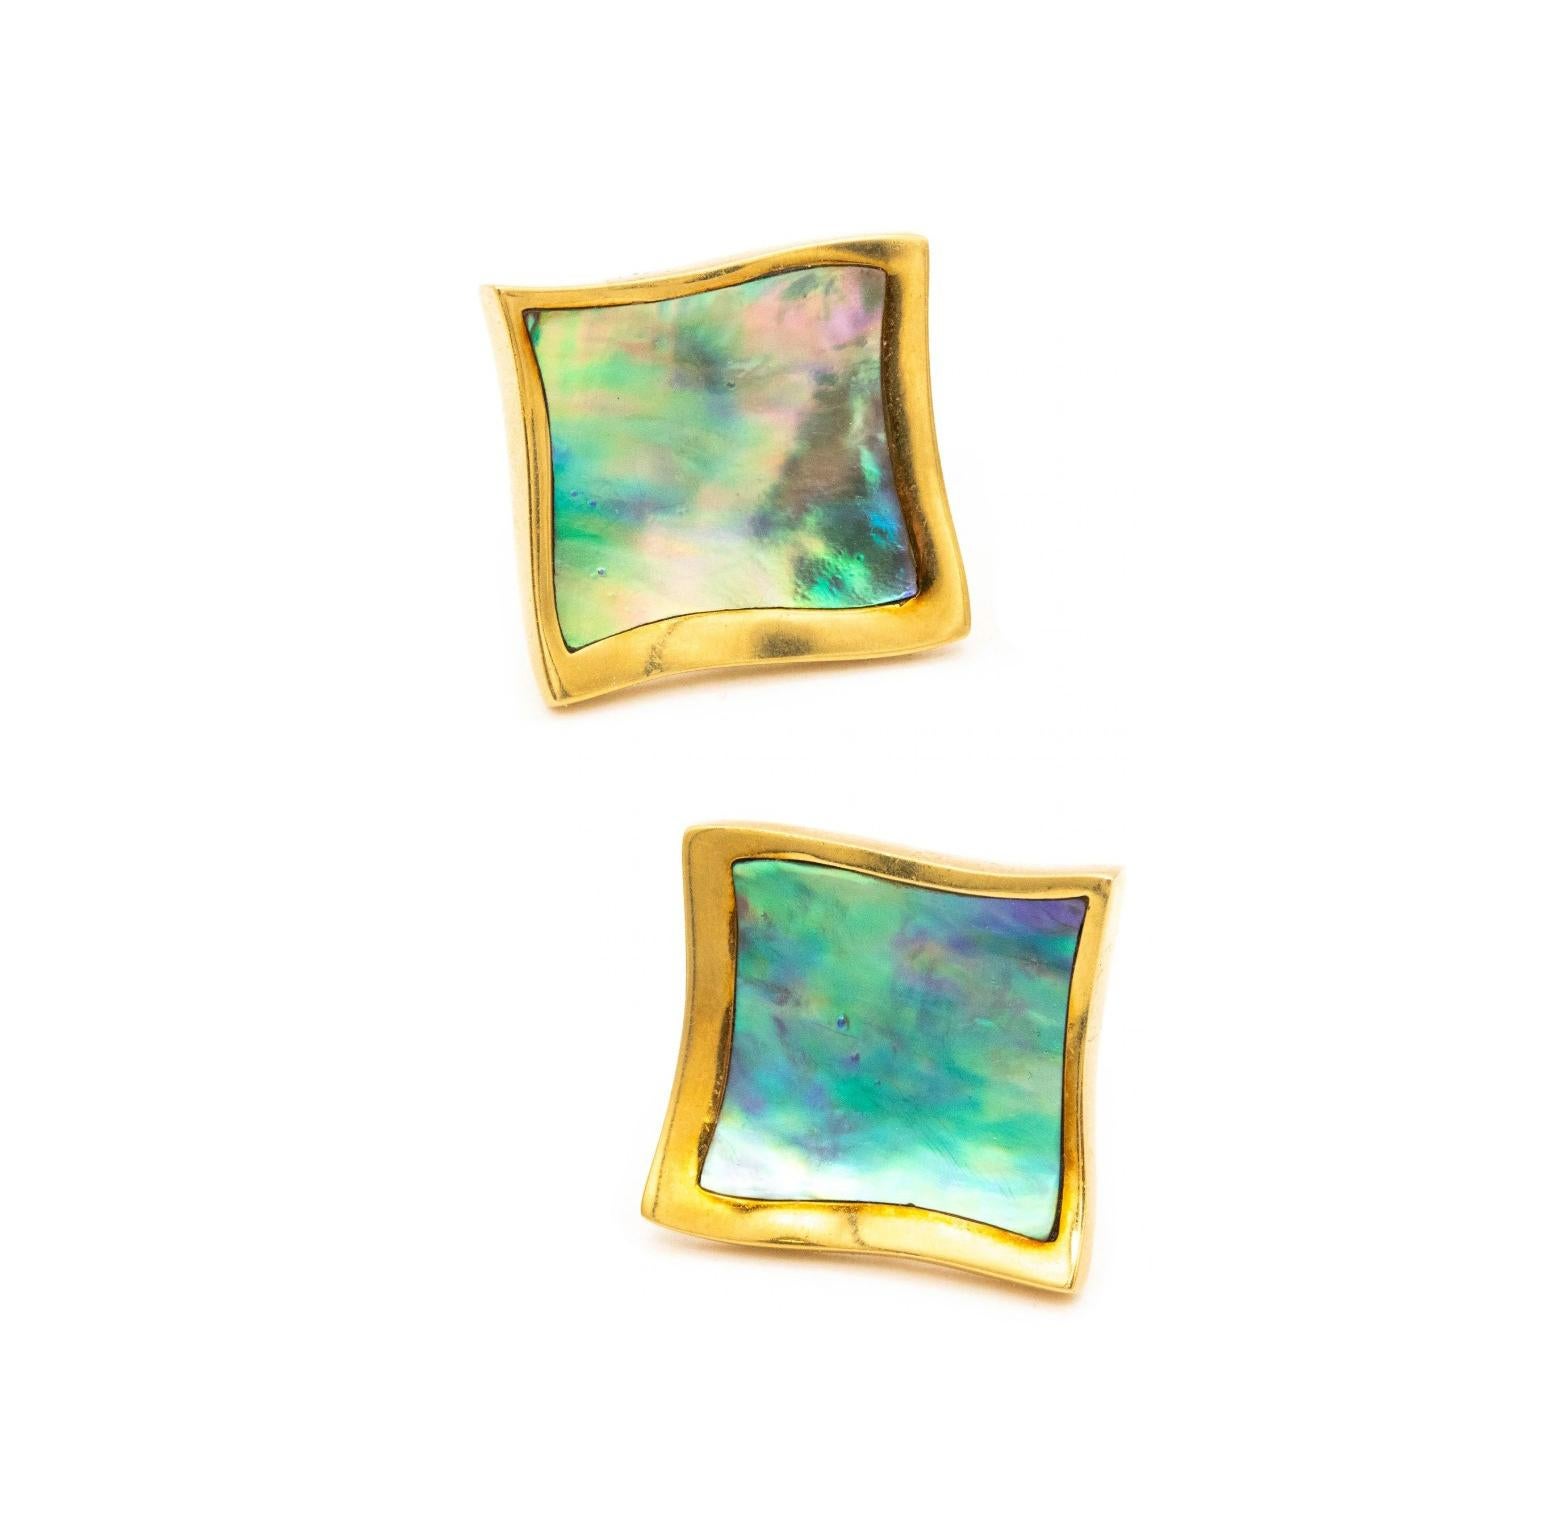 Angela Cummings 1980 Rare Squared Earrings 18Kt Yellow Gold with Abalone Shell In Excellent Condition For Sale In Miami, FL